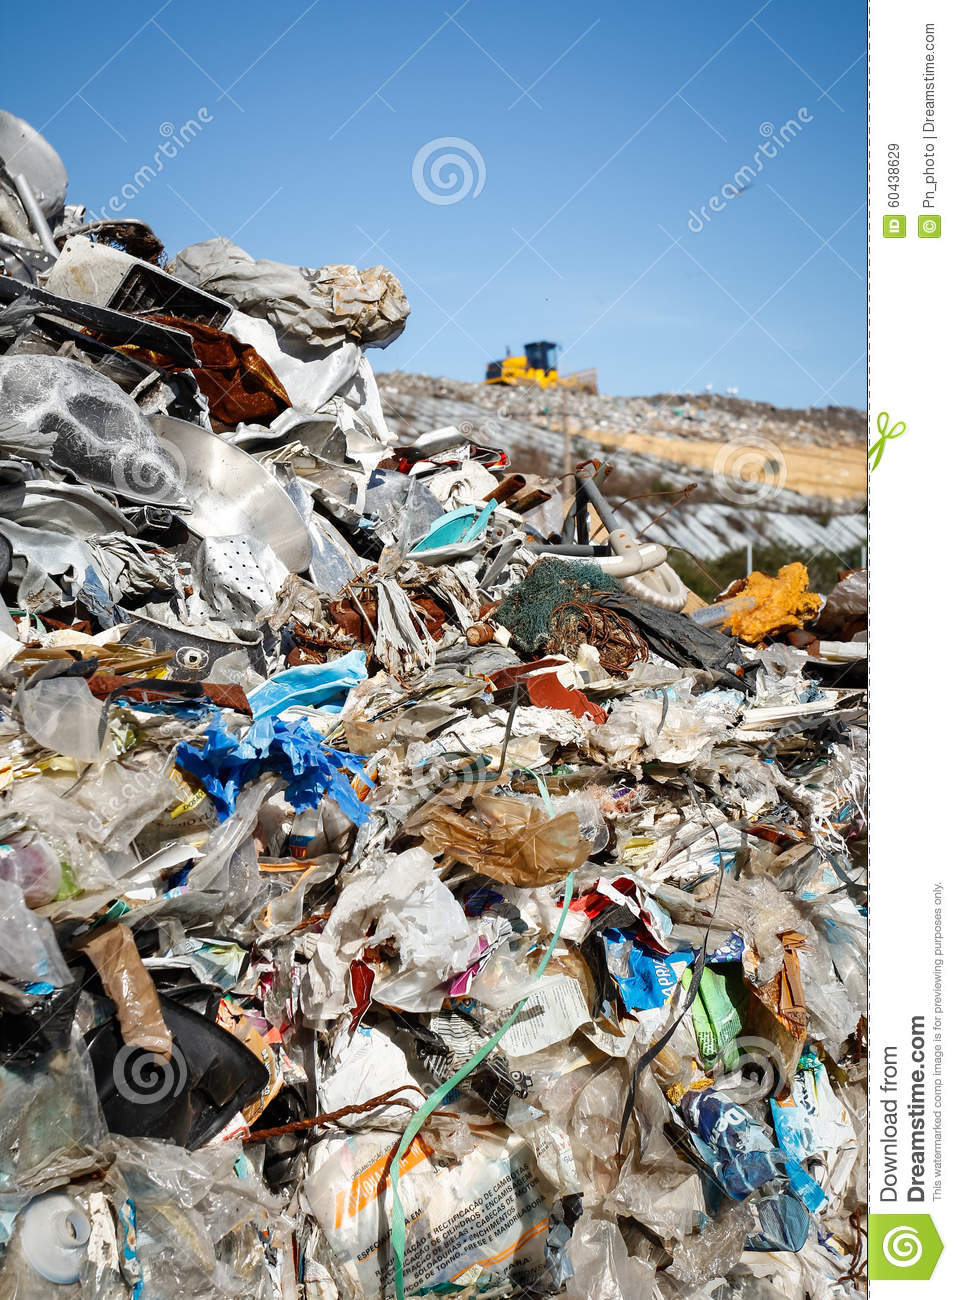 Pile Of Waste And Trash For Recycling Or Safe Disposal Great For